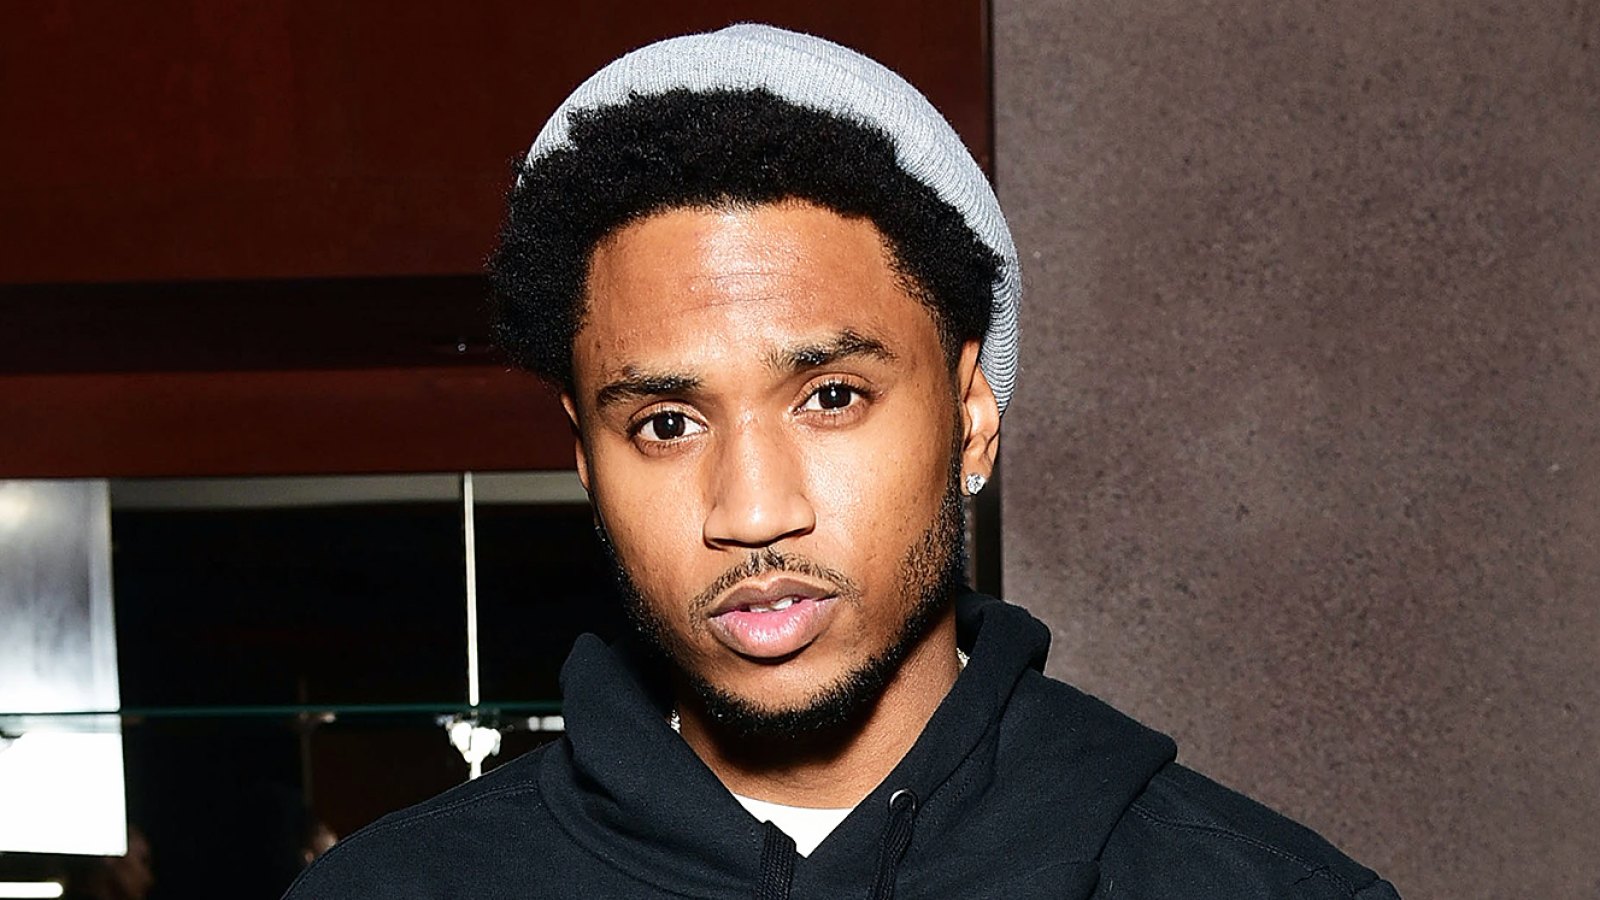 Trey Songz Accused of Physically Assaulting Woman